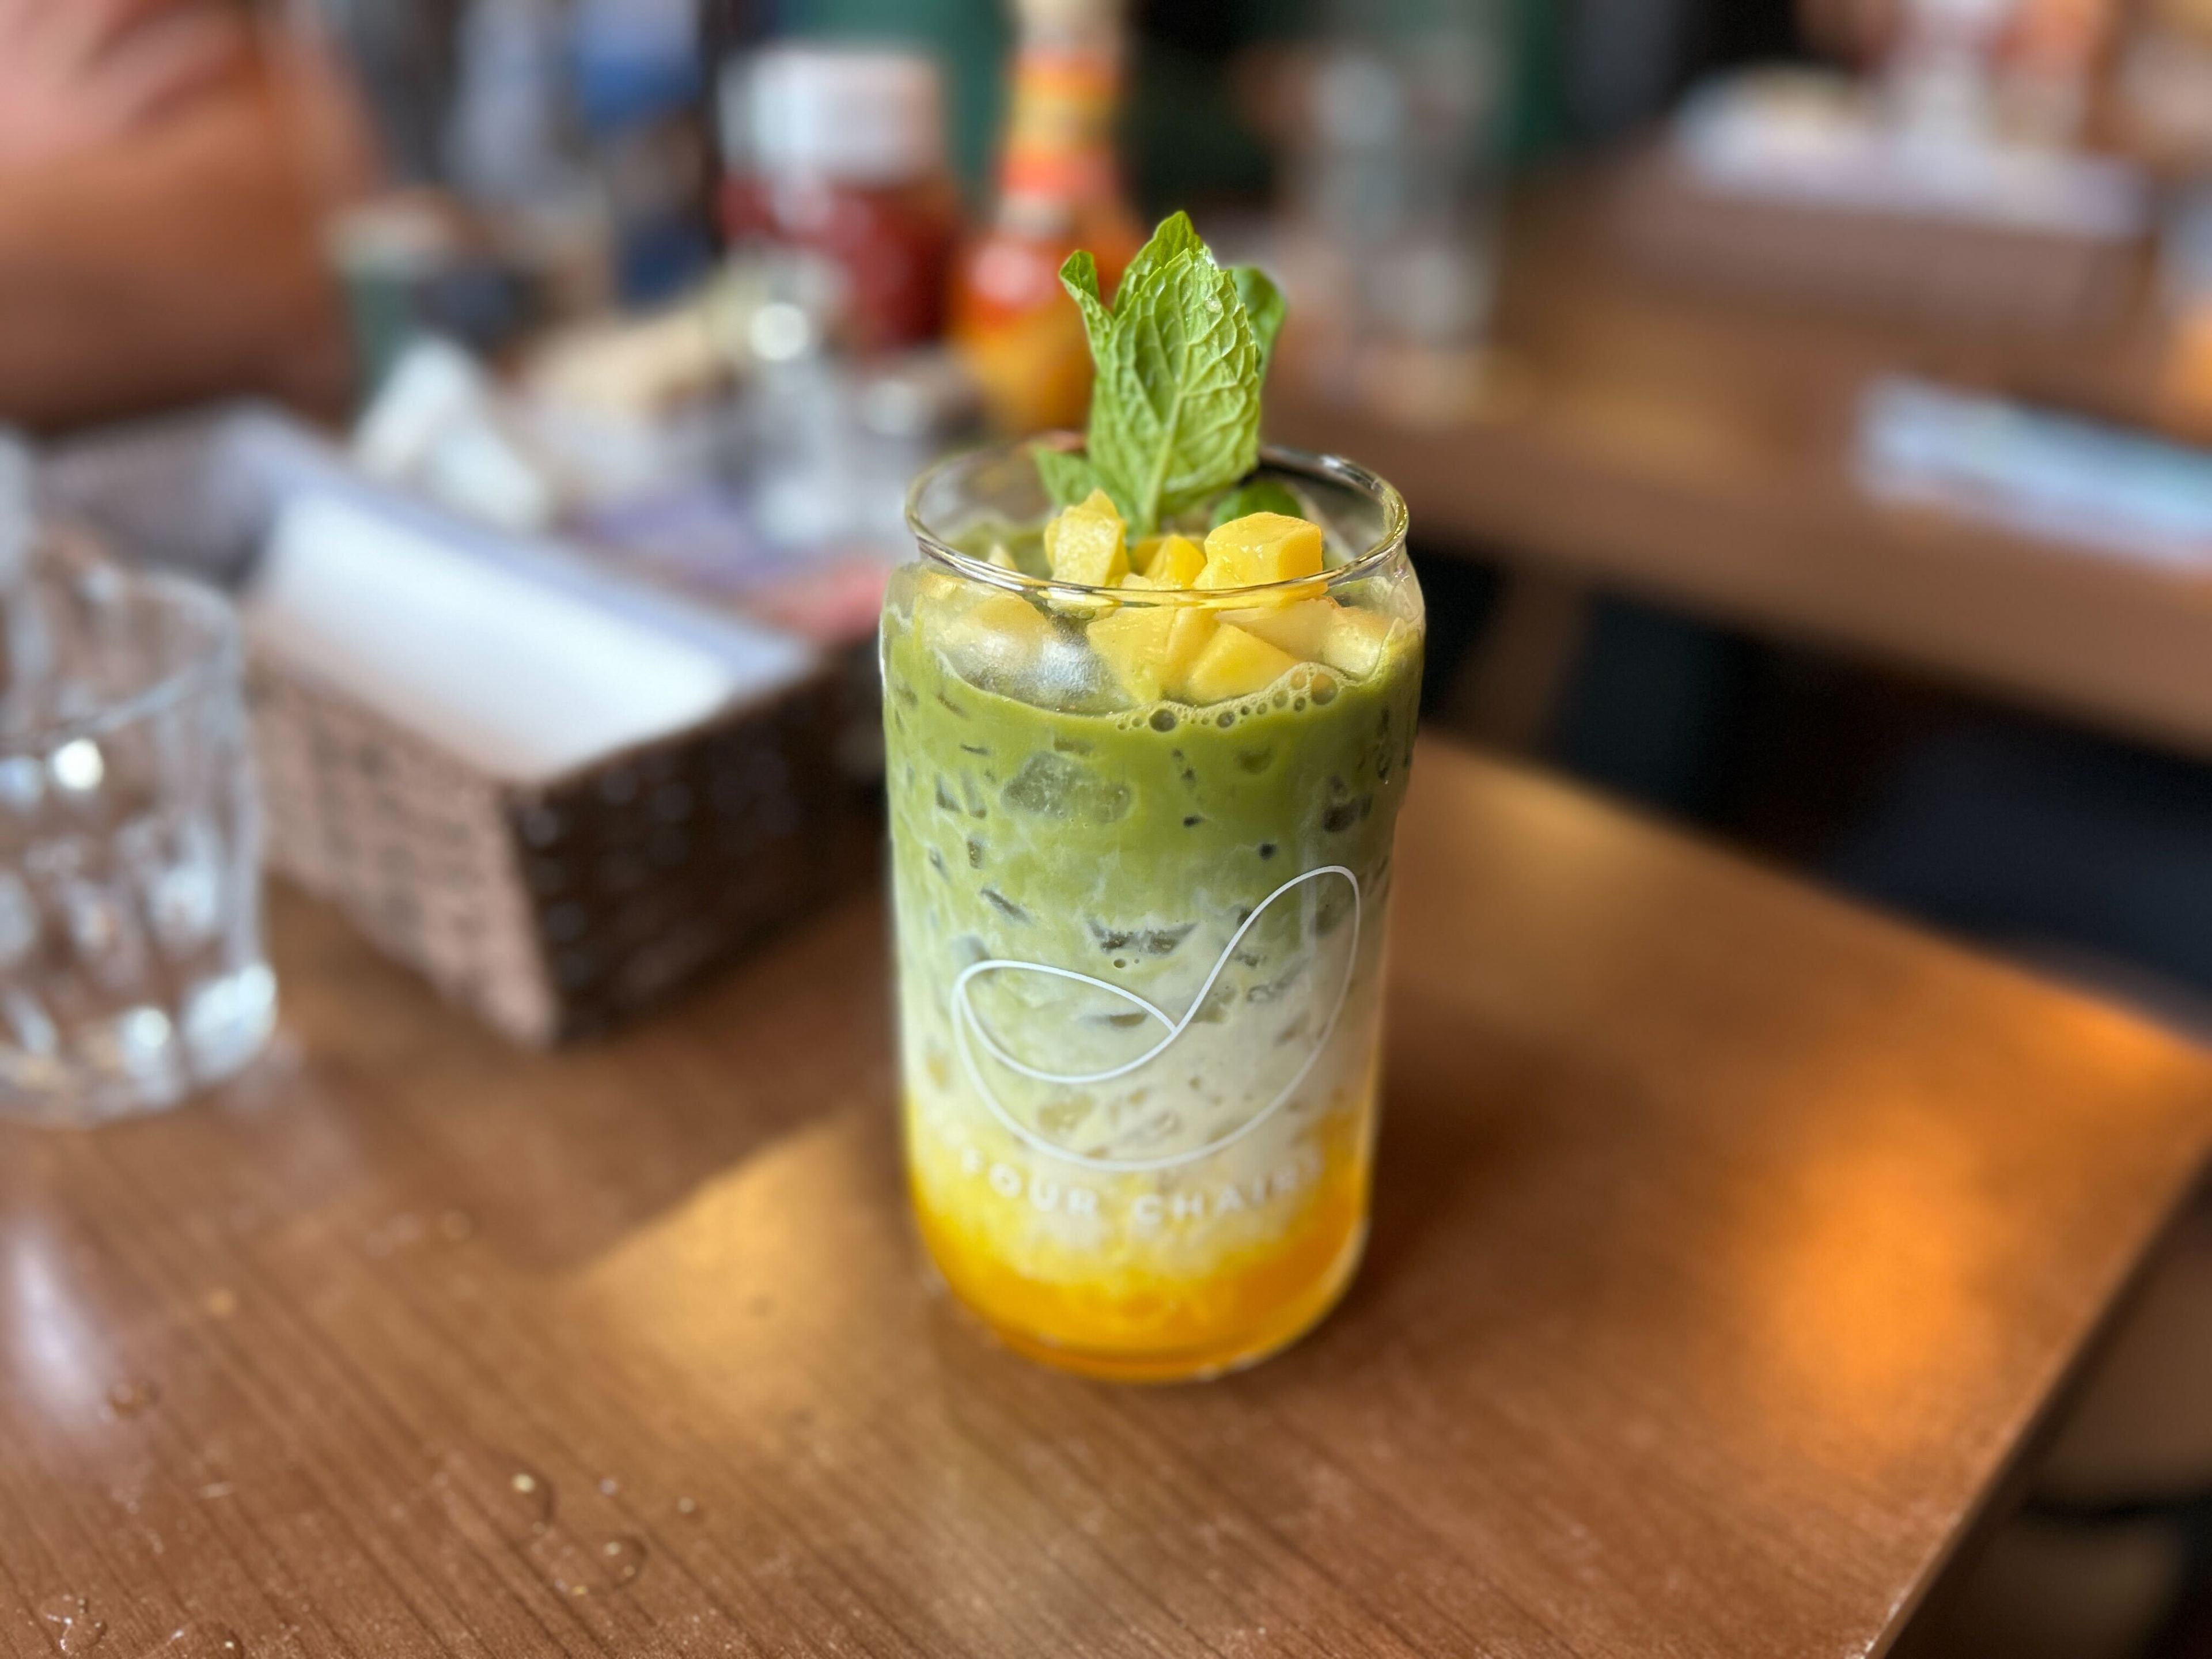 a matcha green tea mango drink in a mason jar-type glass over ice, topped with mango pieces